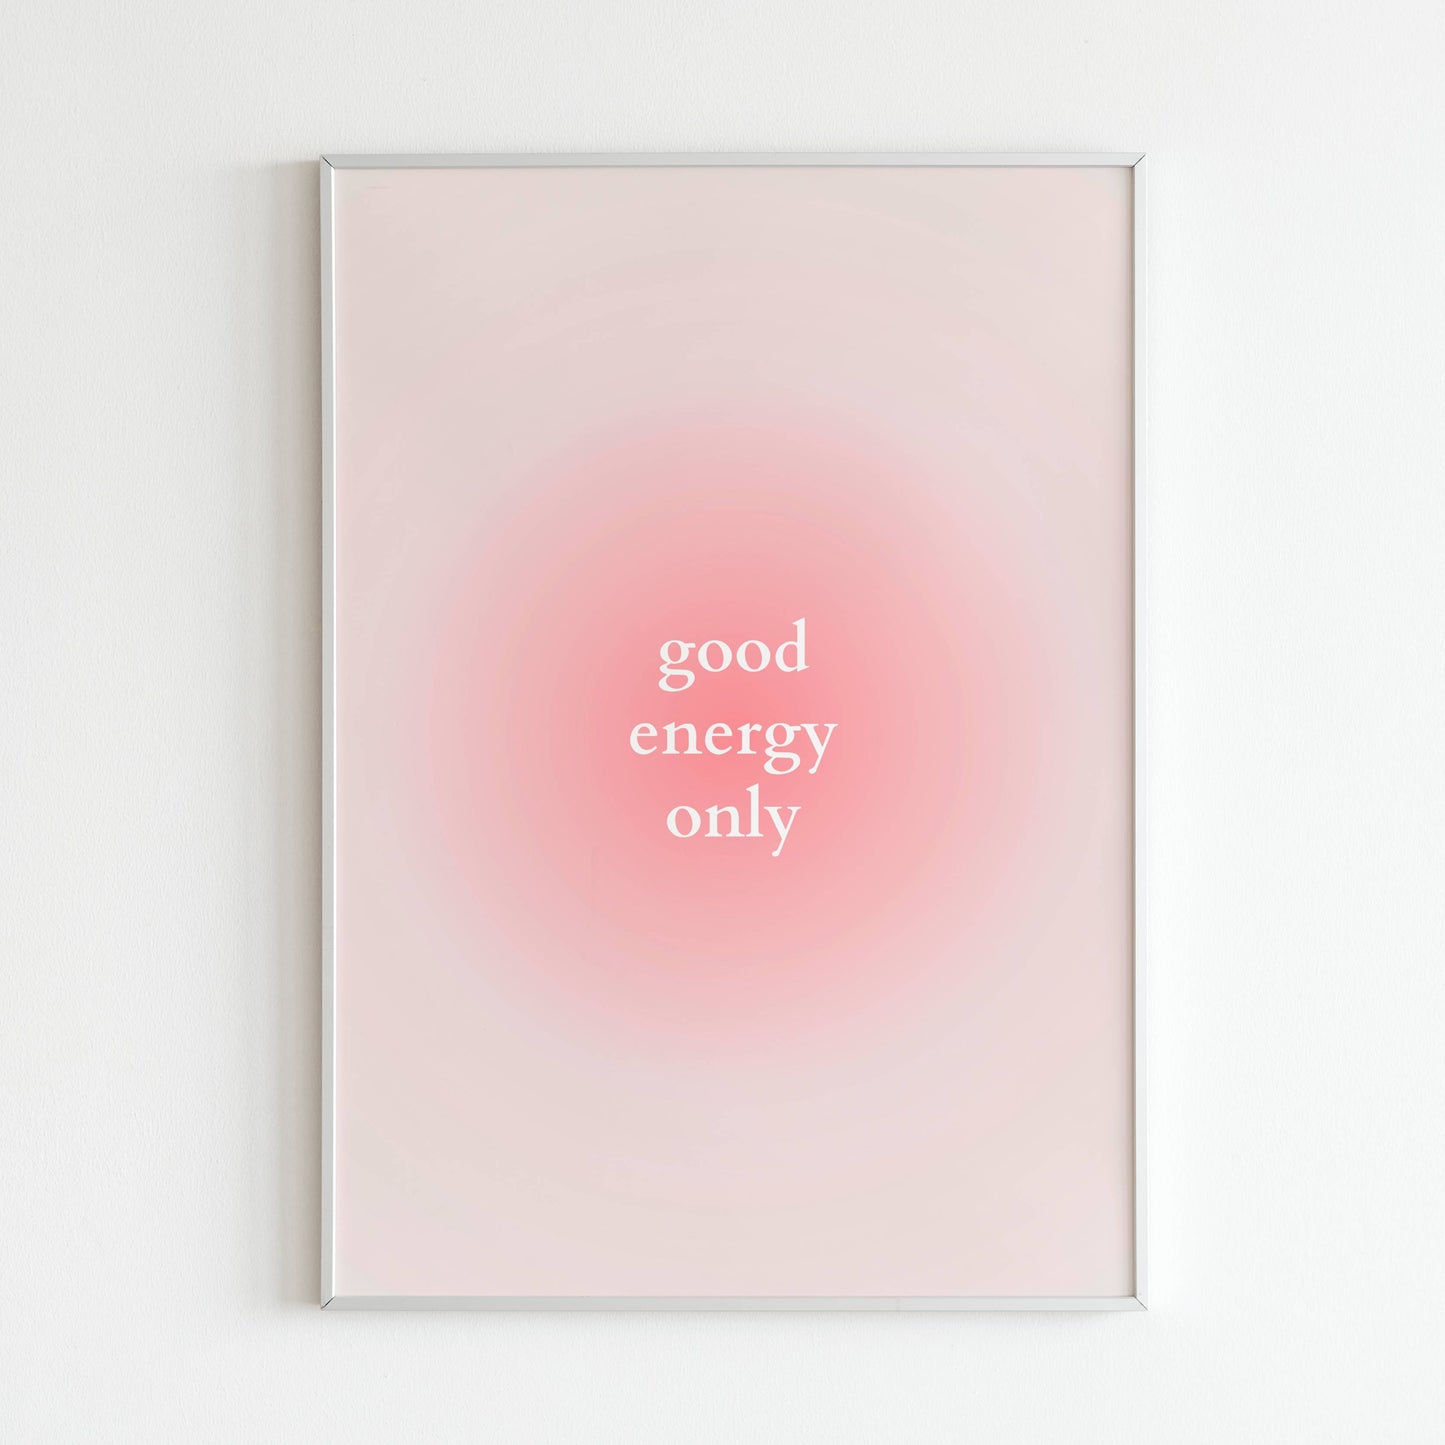 Downloadable "Good energy only" wall art for a reminder to cultivate positivity.